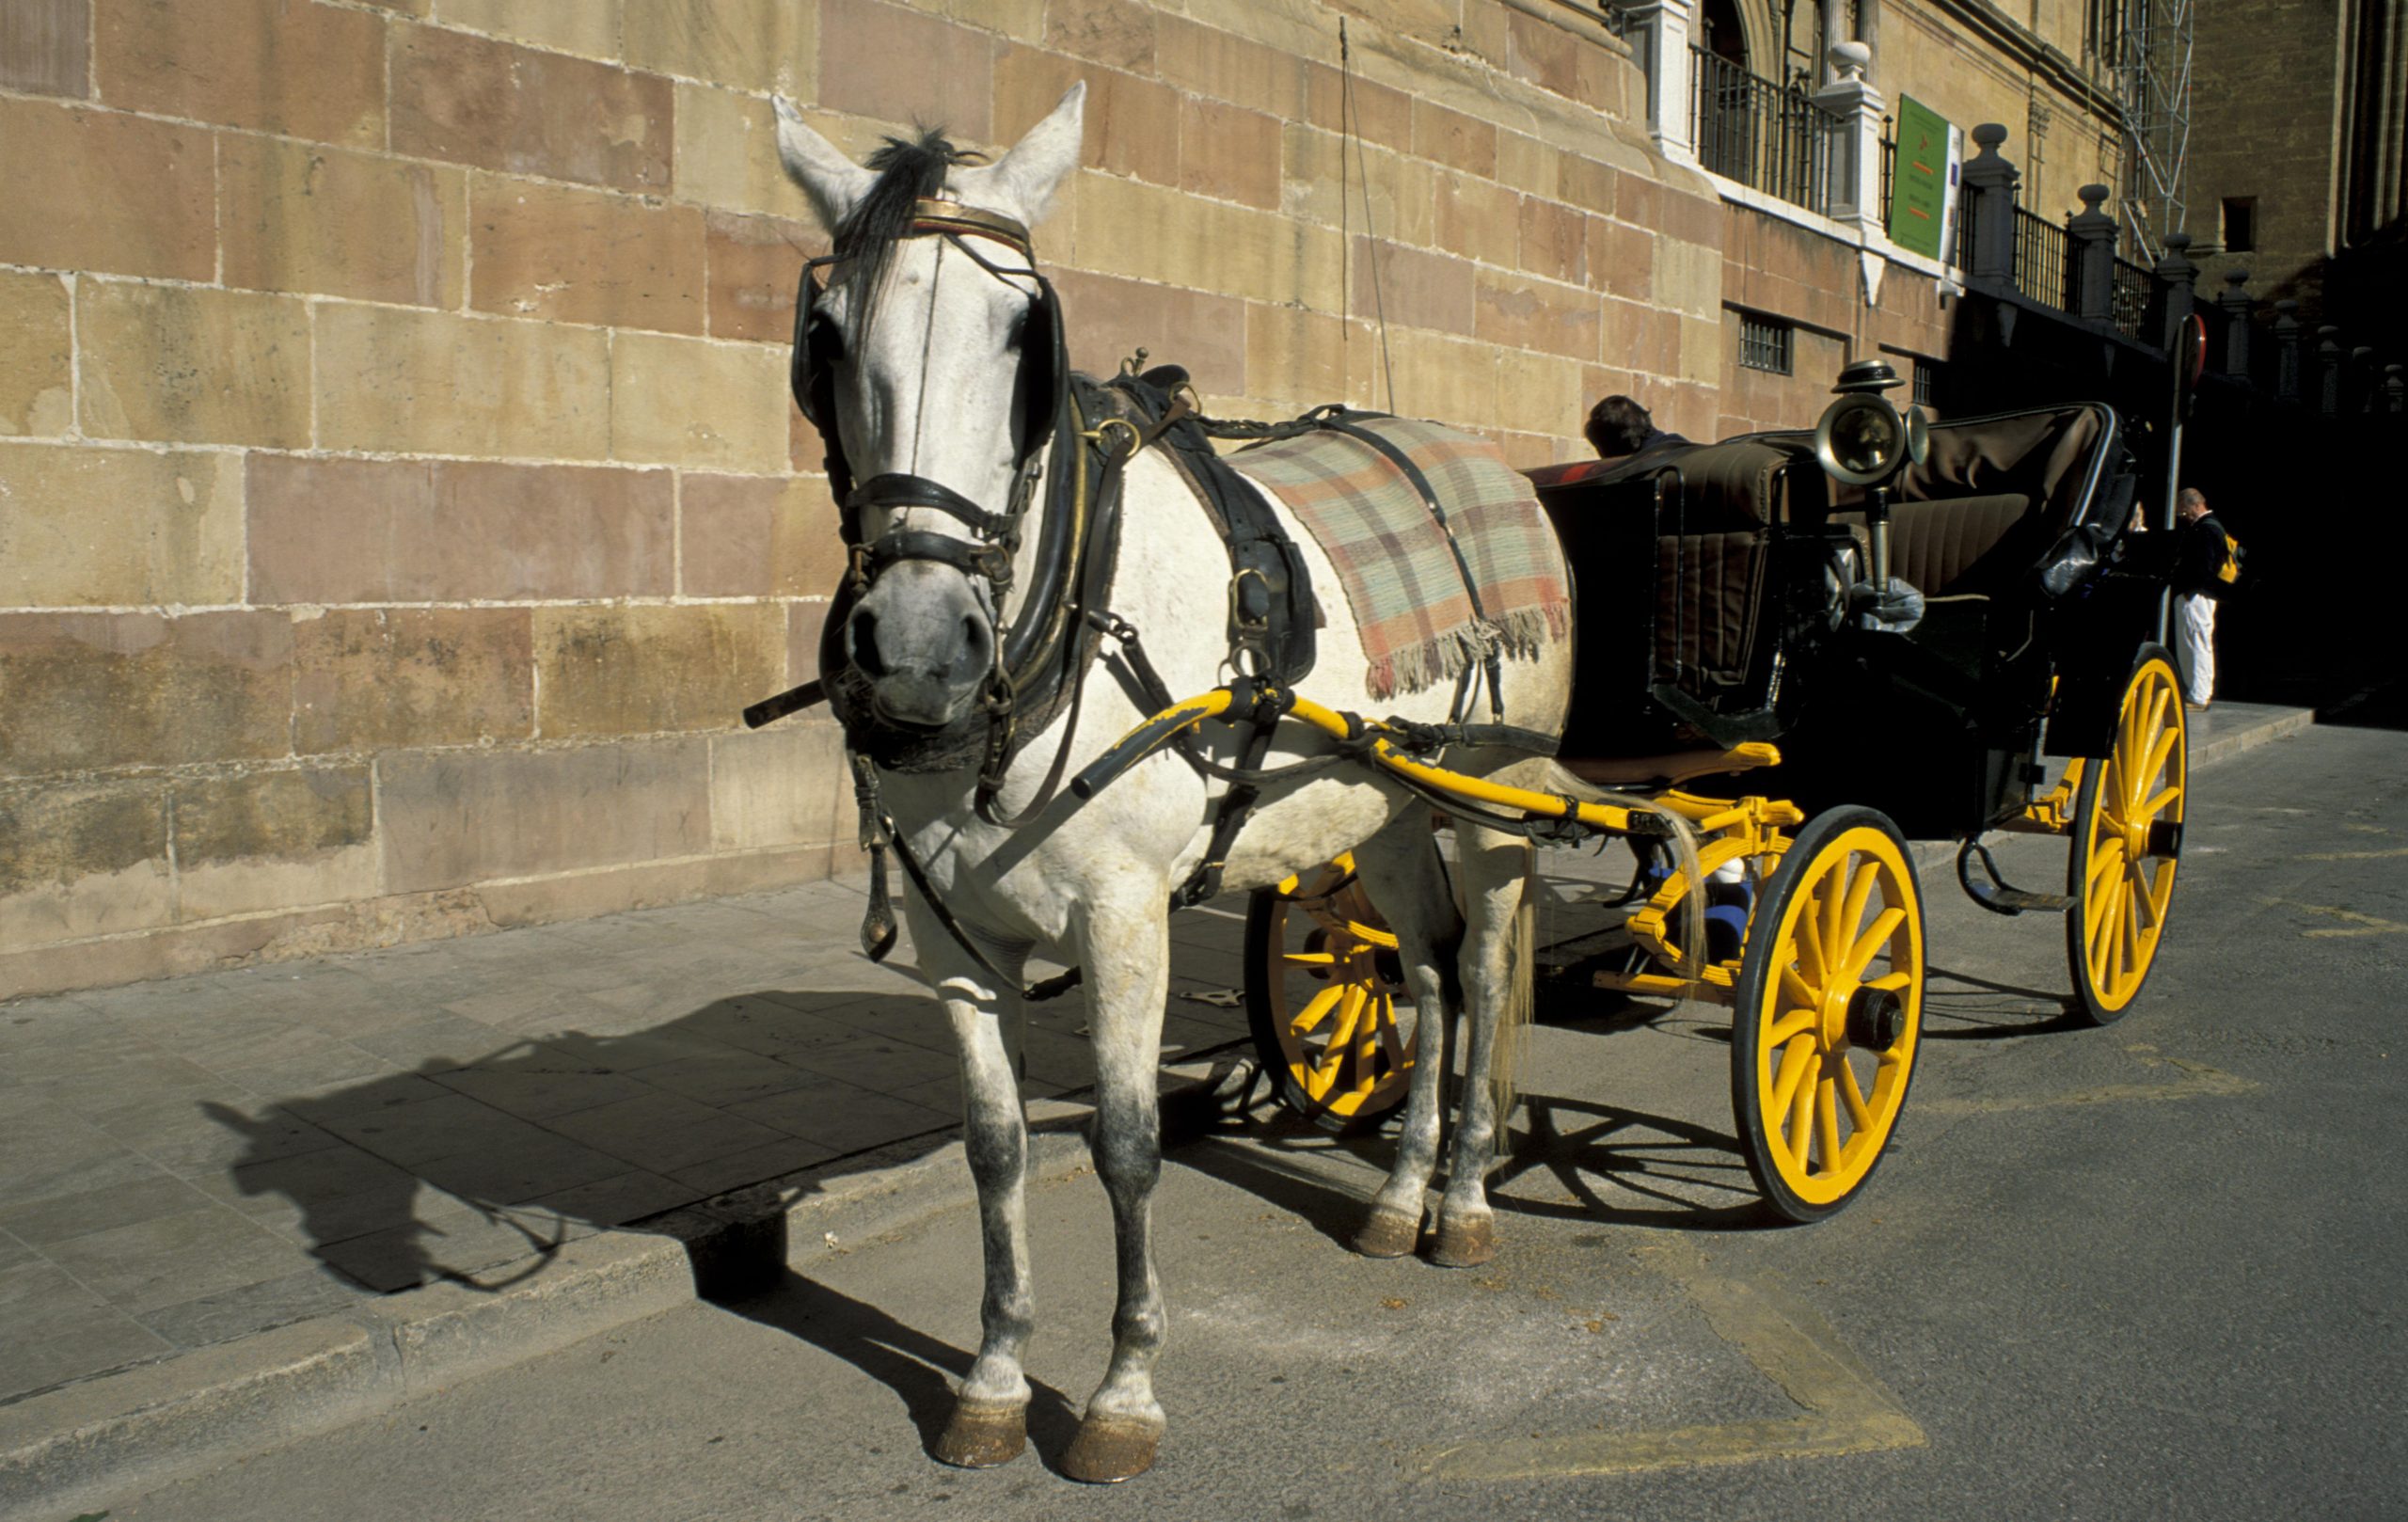 Malaga horse-drawn carriage driver beats up unhappy foreign tourist in Spain